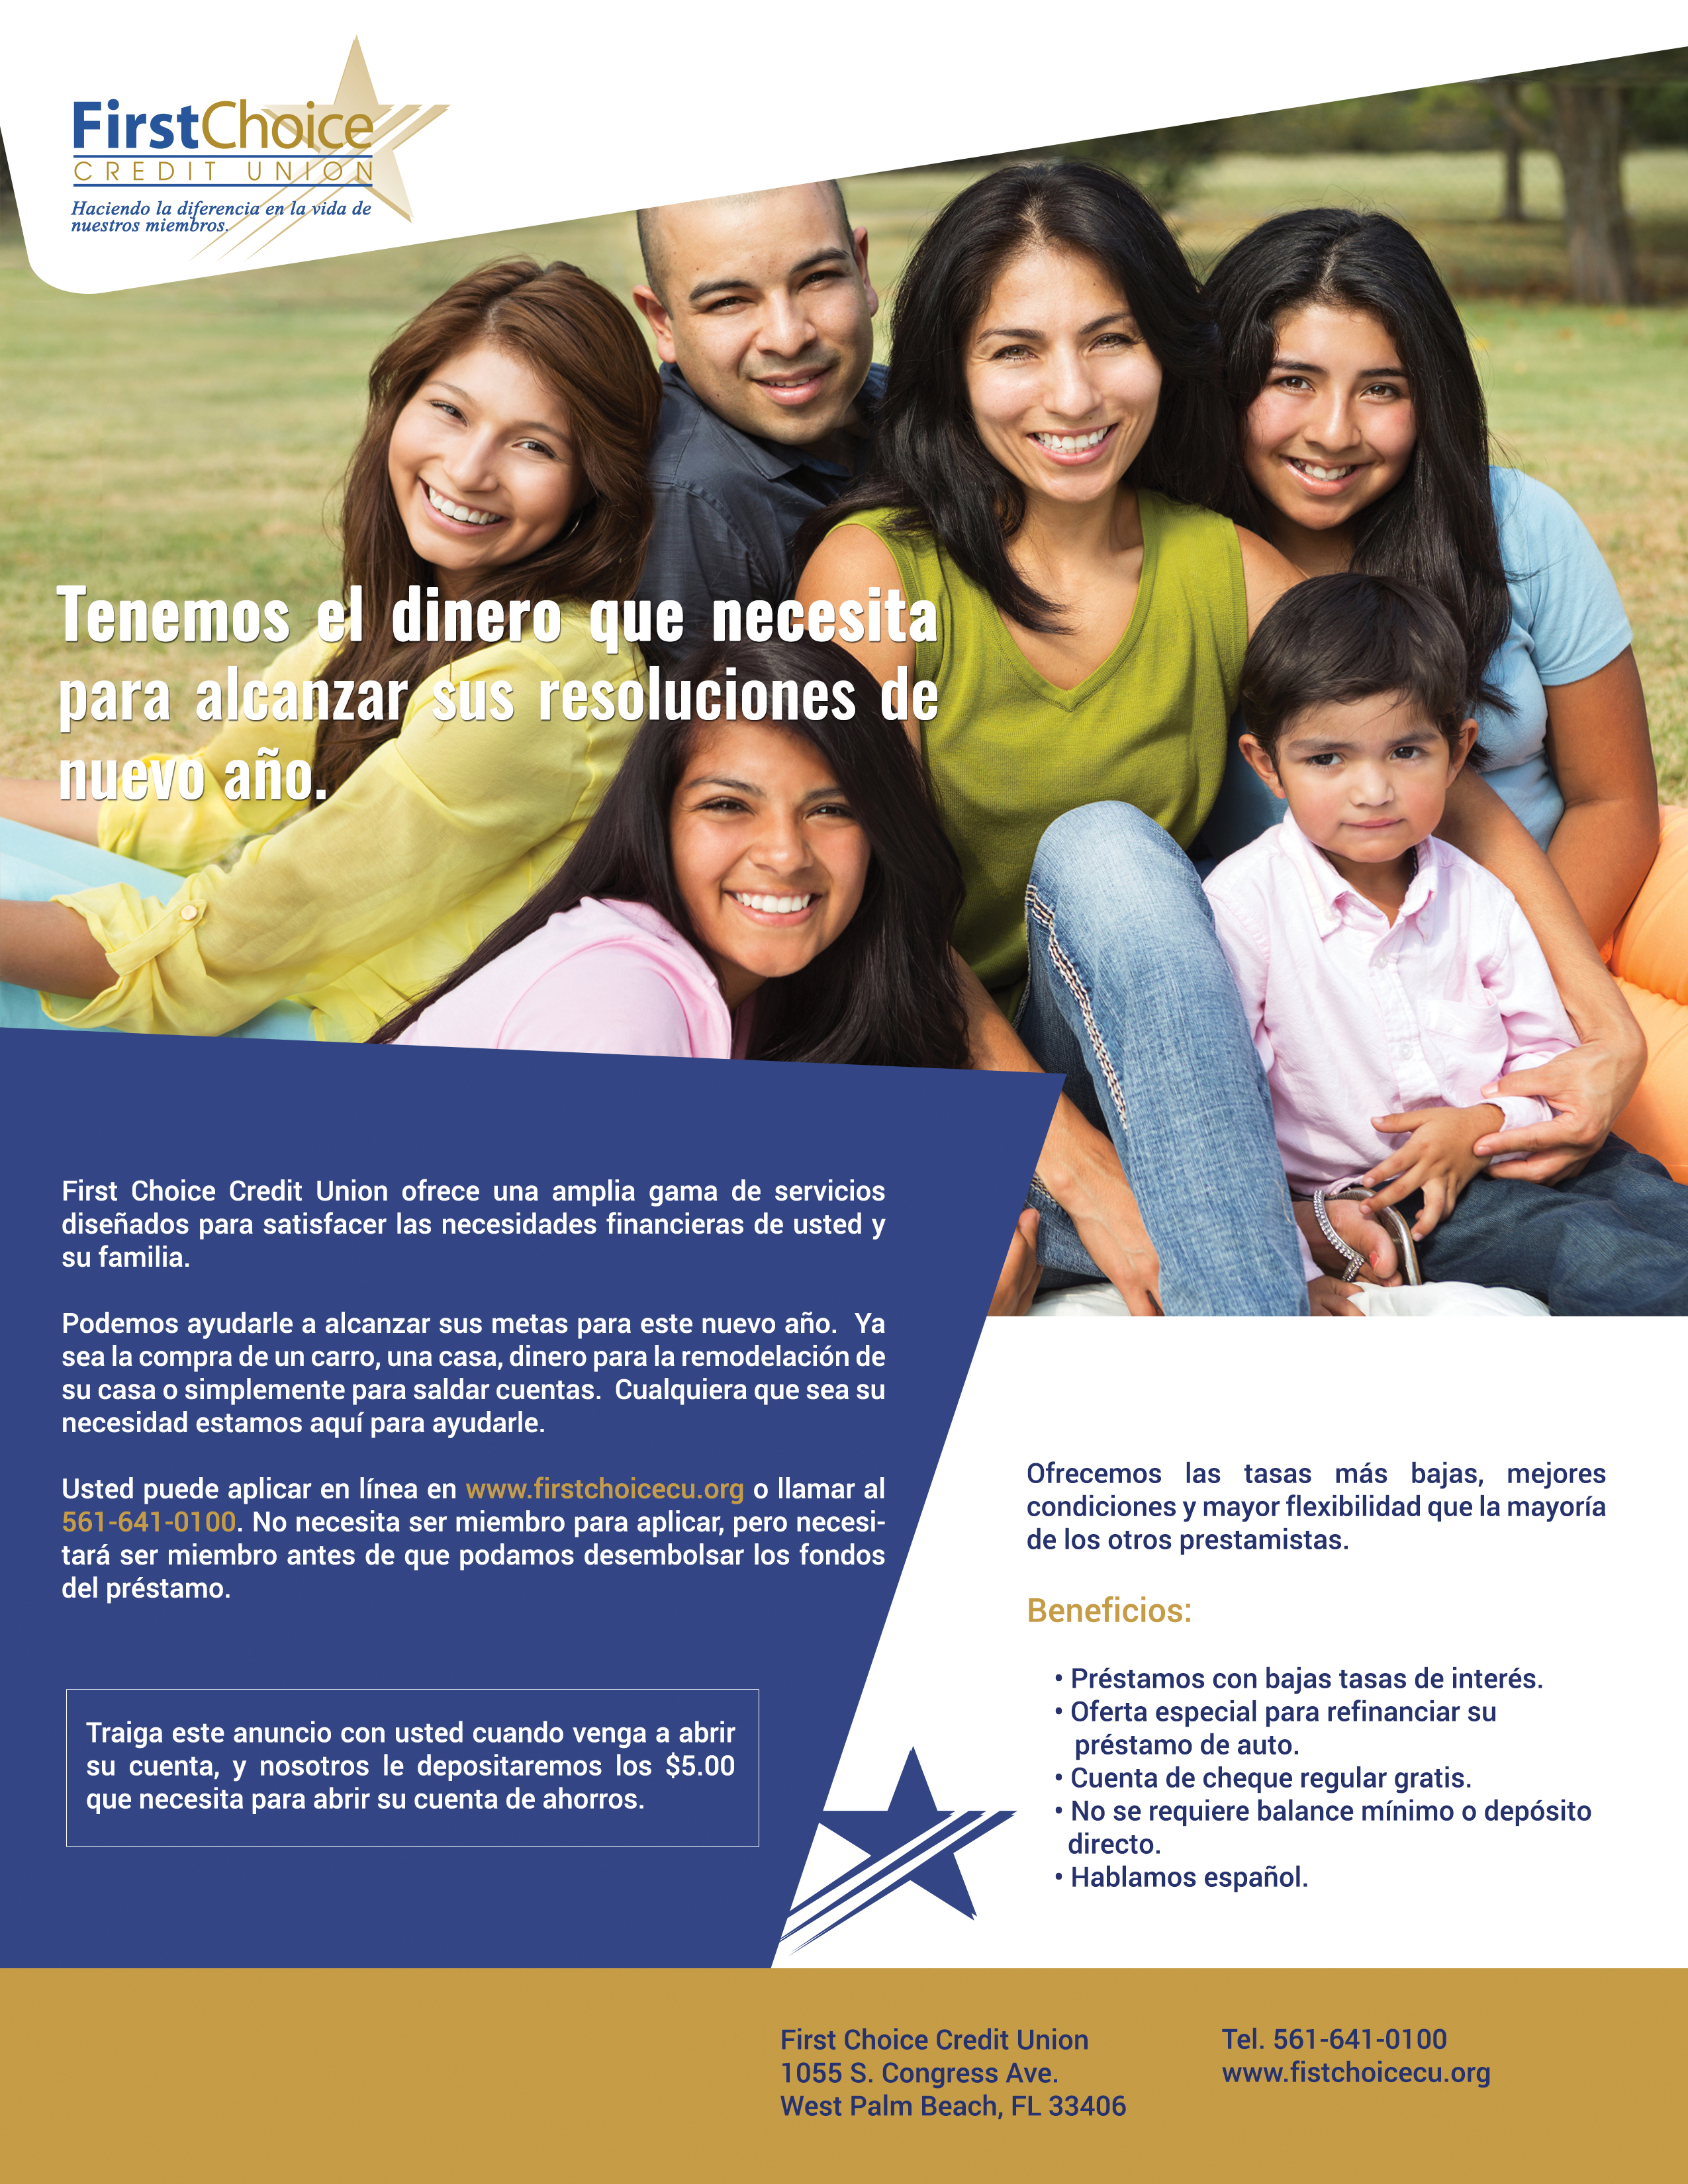 First Choice Credit Union Ad Design